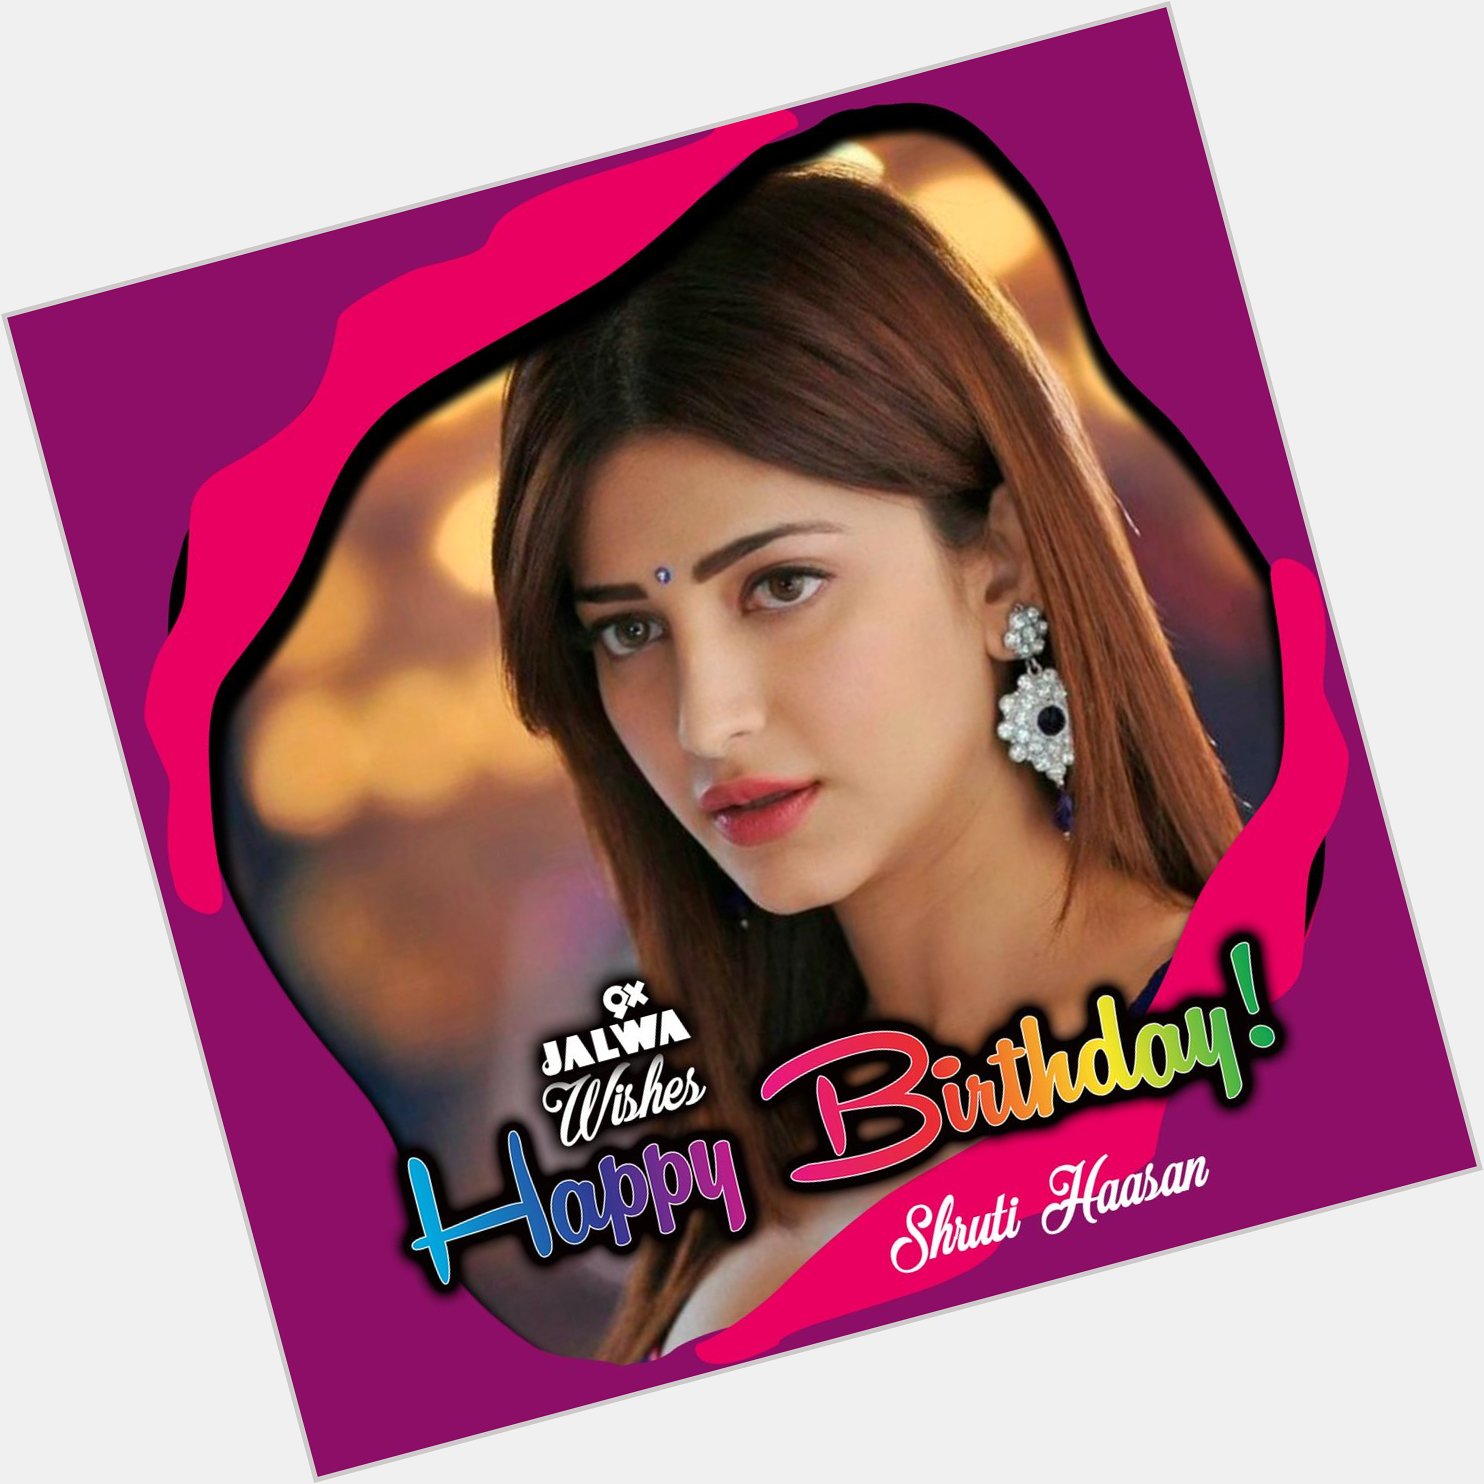 Here\s wishing the talented actress and singer, Shruti Haasan, a very Happy Birthday! 